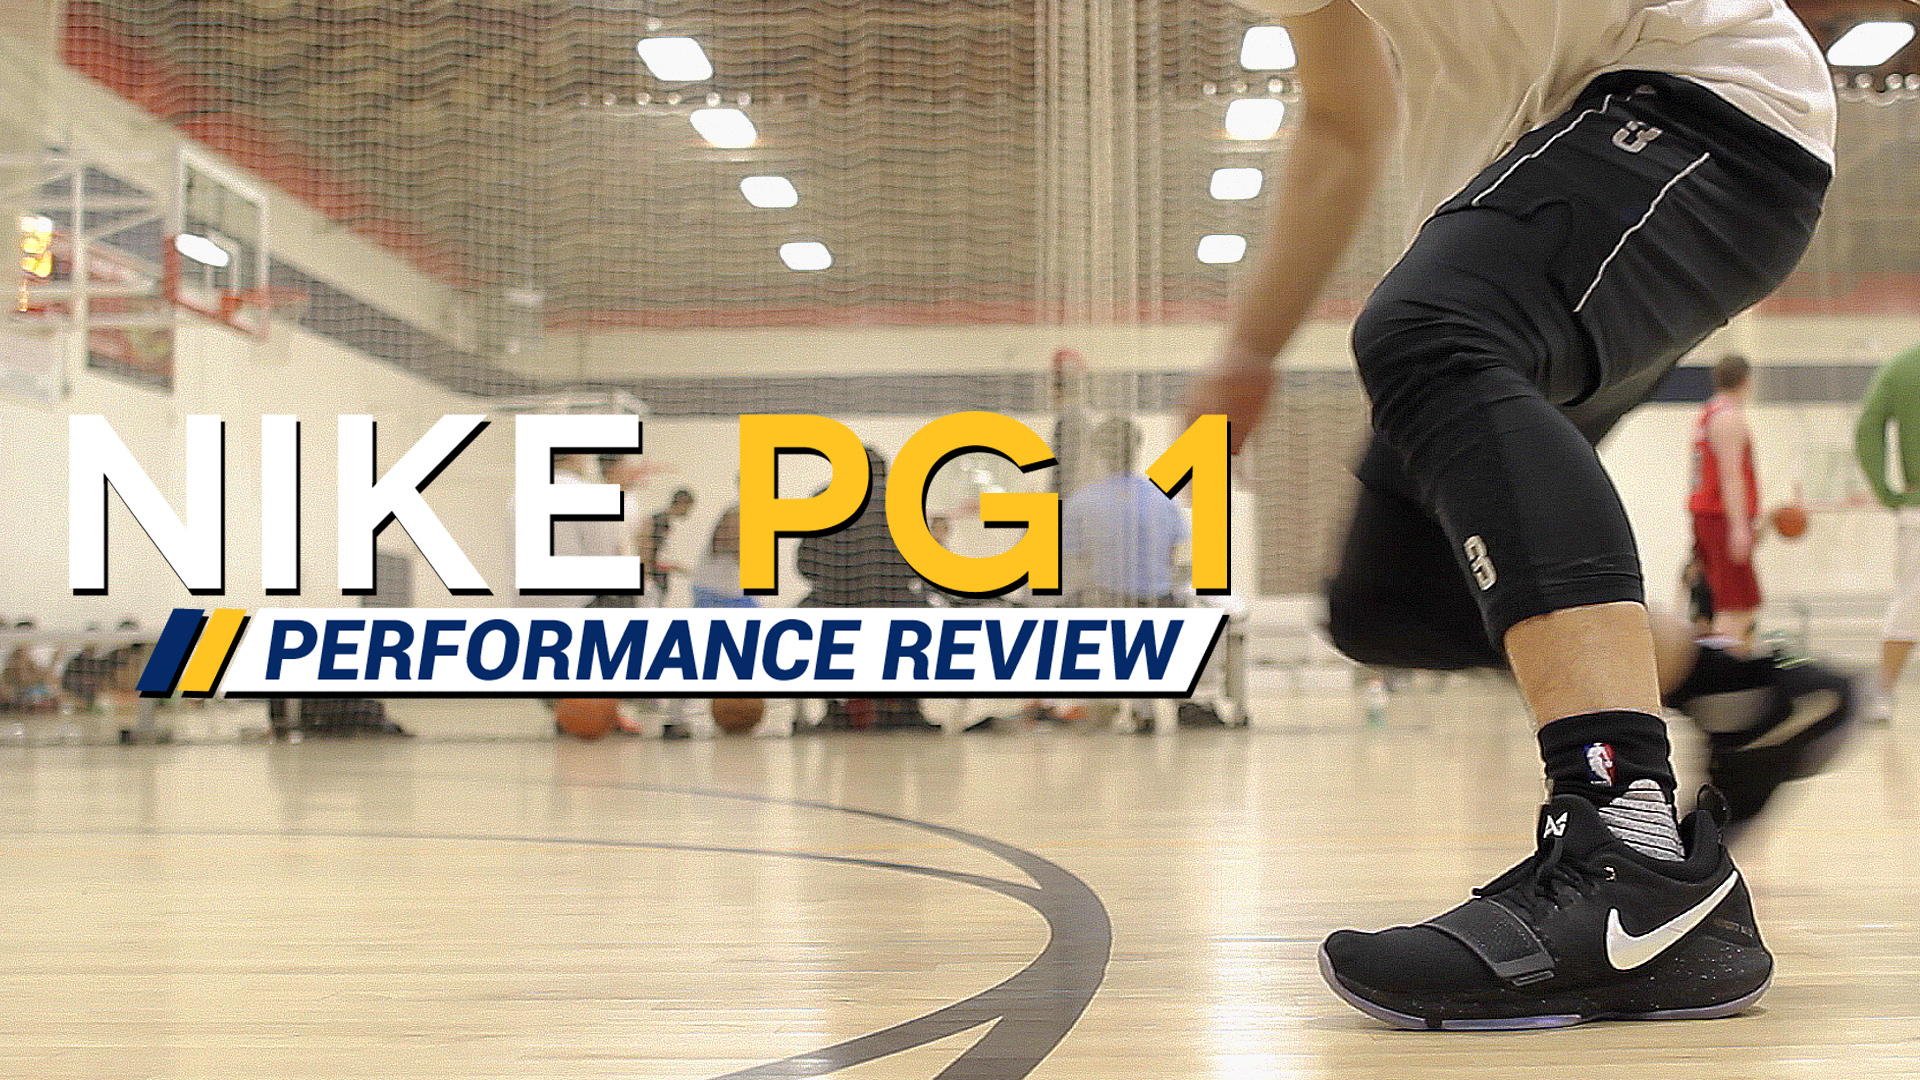 Nike PG 1 Performance Review 